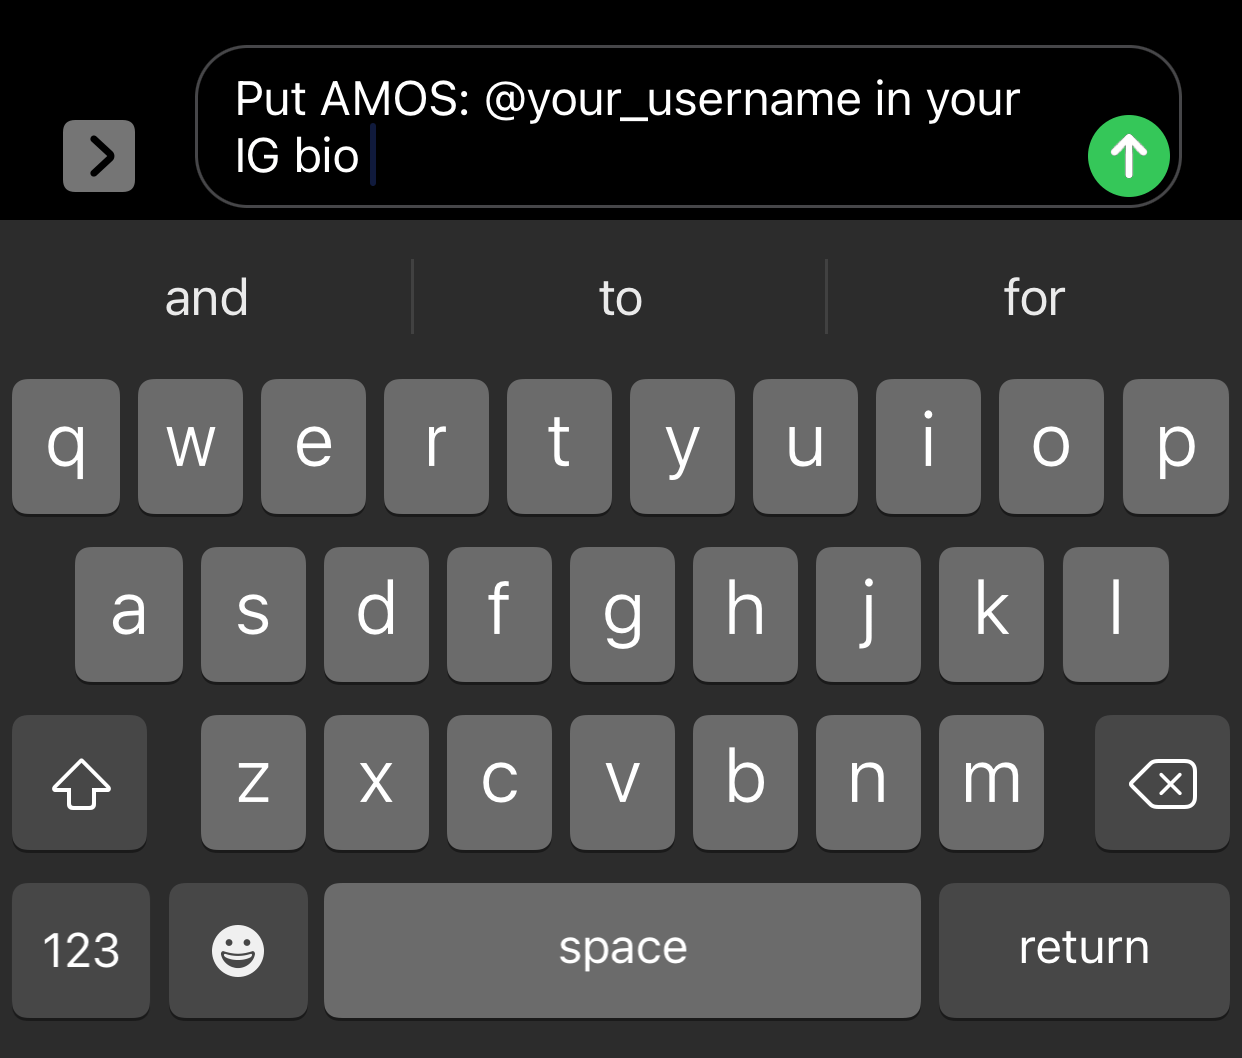 An example of the initialism AMOS in a text message.